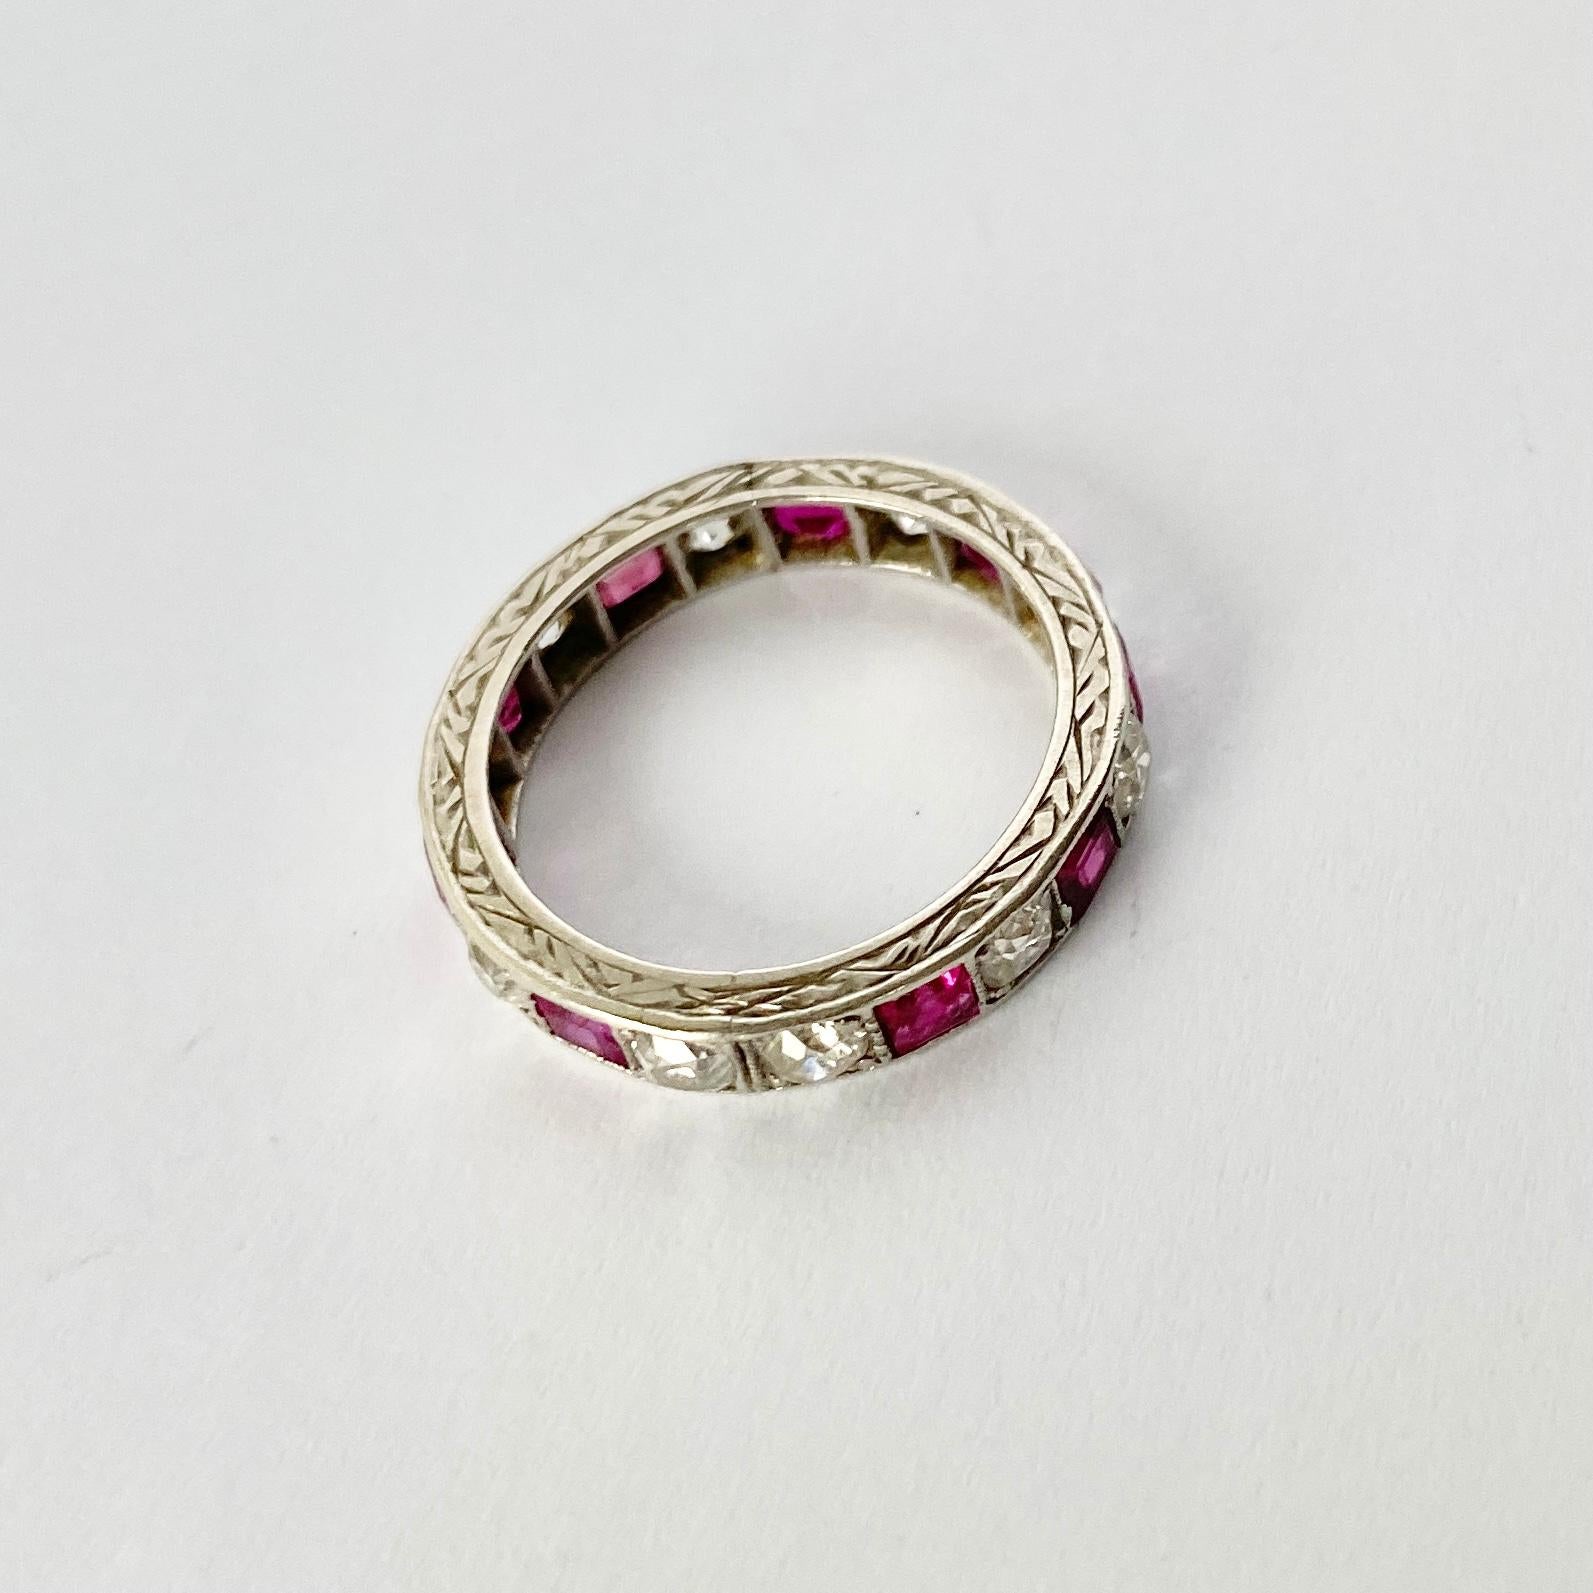 This full eternity ring is absolutely stunning! The ring boasts a total of 1ct of round cut diamonds and also hold a total of 1.3ct square cut rubies. The stones are set alternately apart from one set of double diamonds. The side of the band has